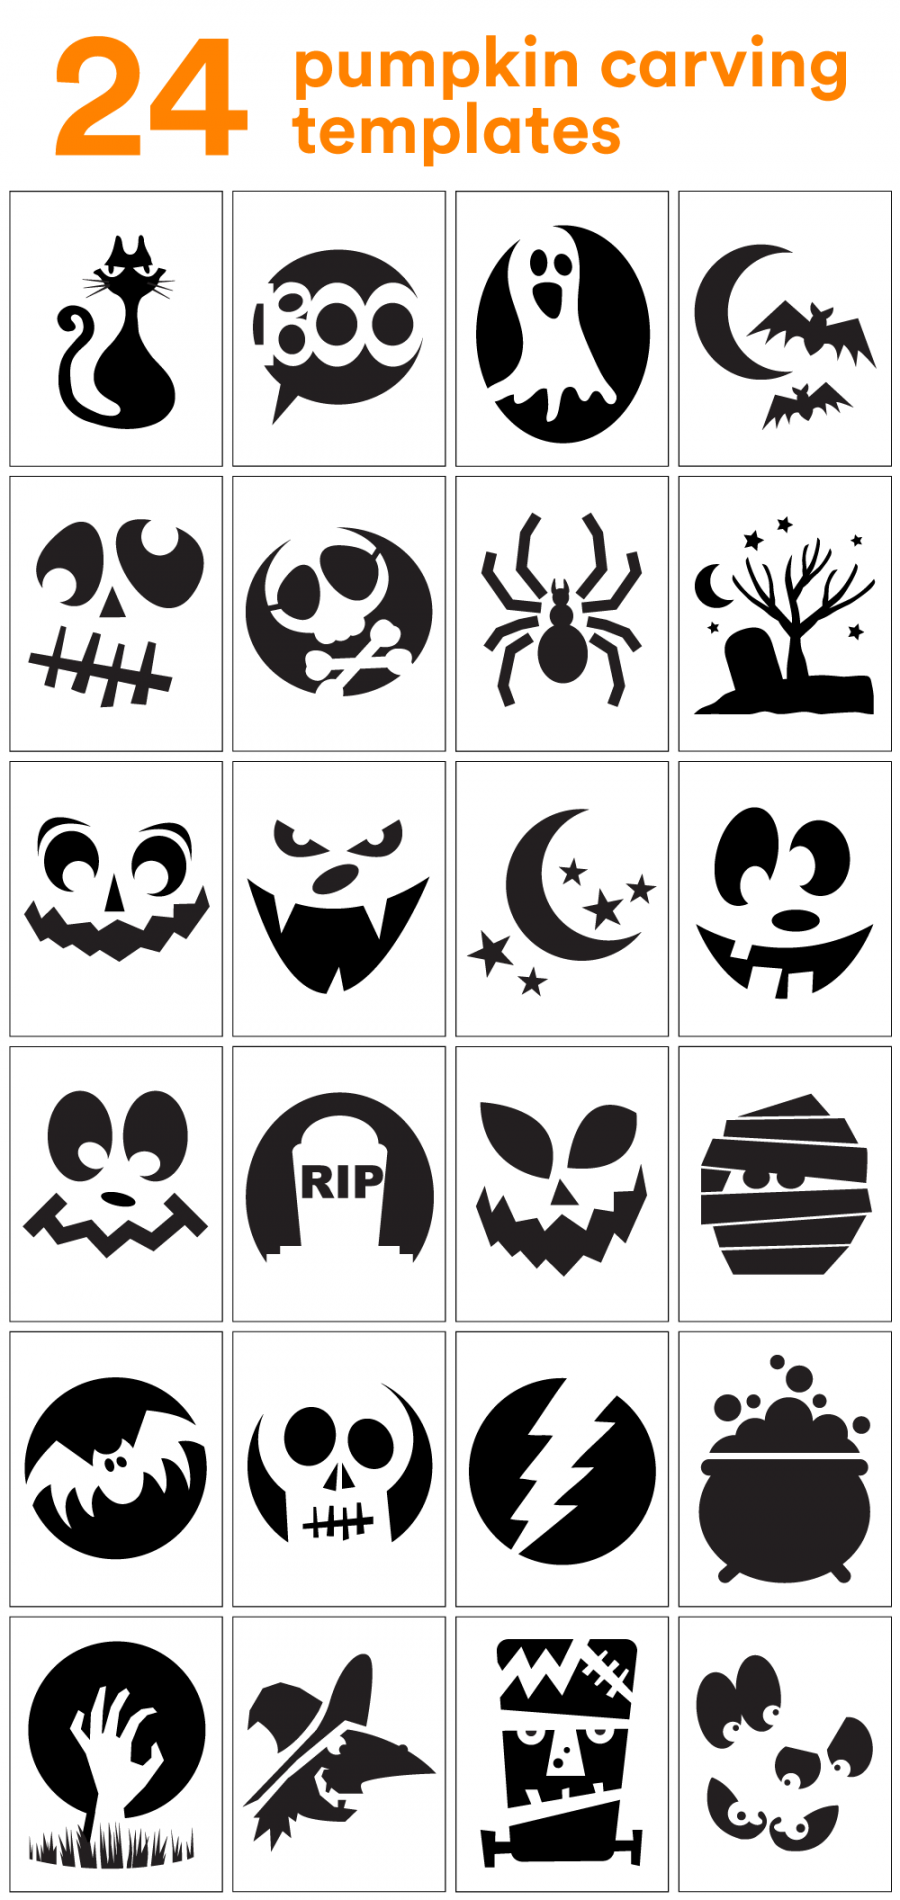 Free Stencils For Pumpkin Carving Printable - Printable - How to Carve the Coolest Pumpkin on the Block (Carving Stencils